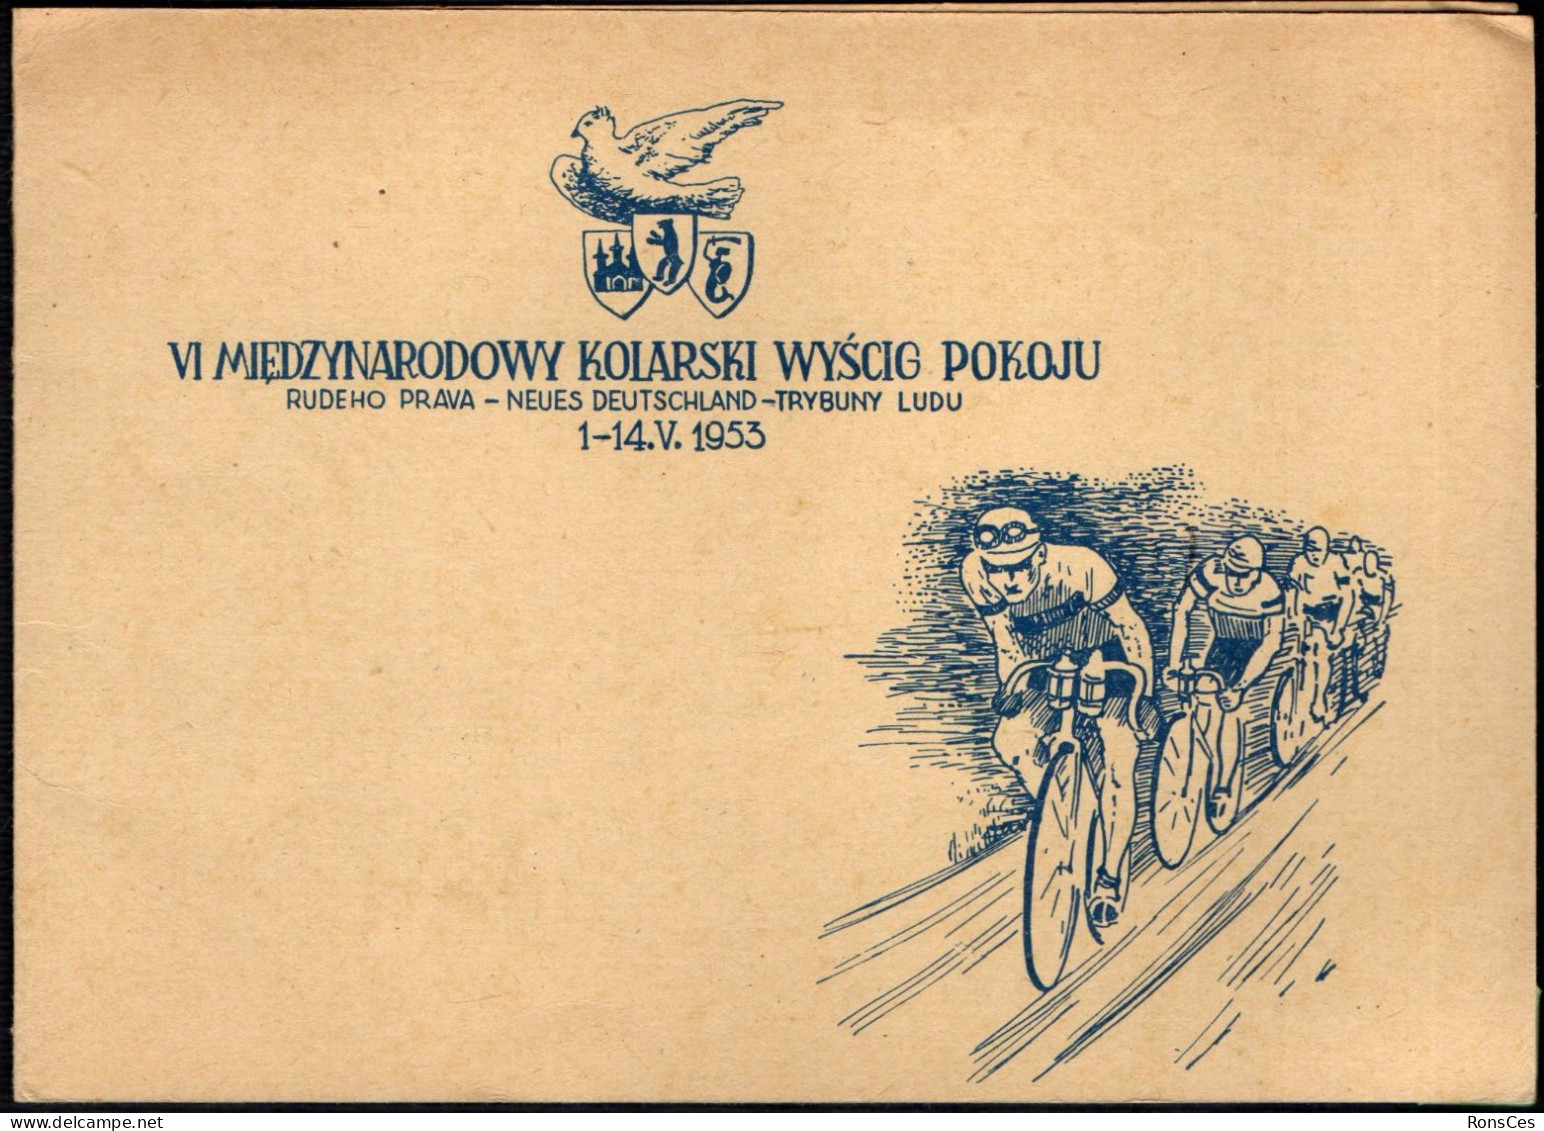 CYCLING - POLAND 1953 - THE INTERNATIONAL CYCLING RACE OF PEACE - SMALL FOLDER - A - Ciclismo